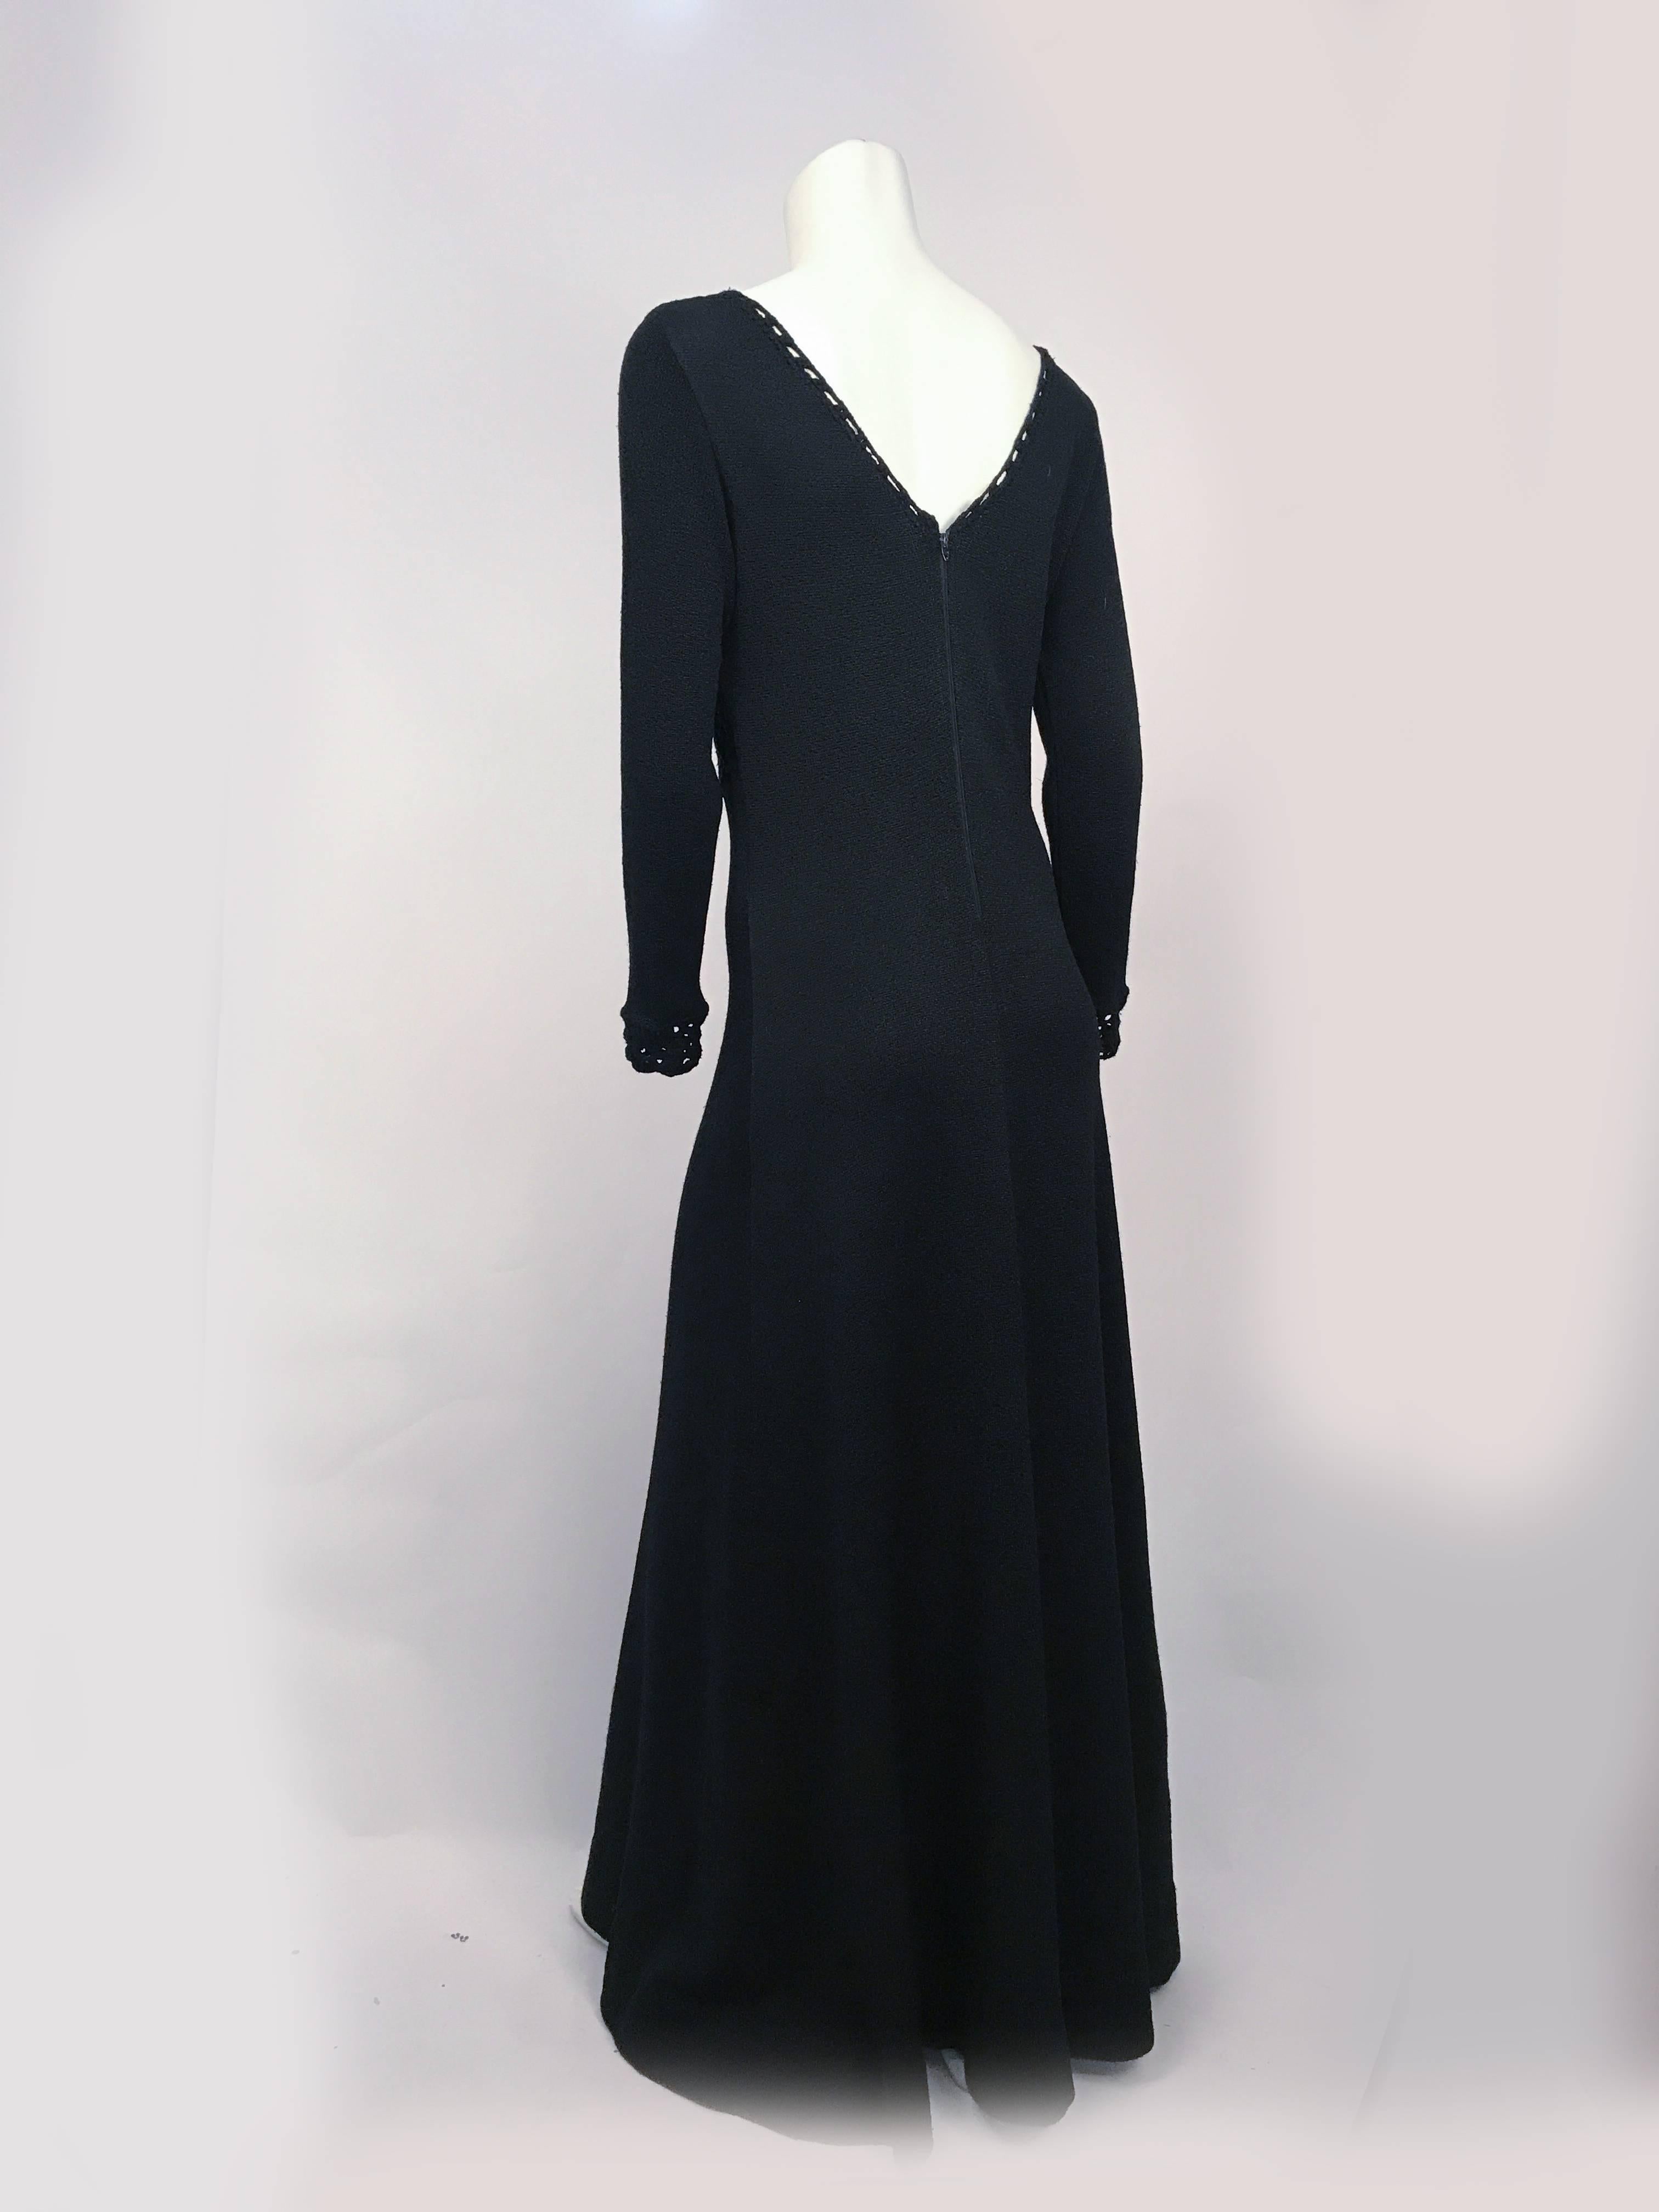 1970s Black Knit and Crochet Full Length Dress In Good Condition For Sale In San Francisco, CA